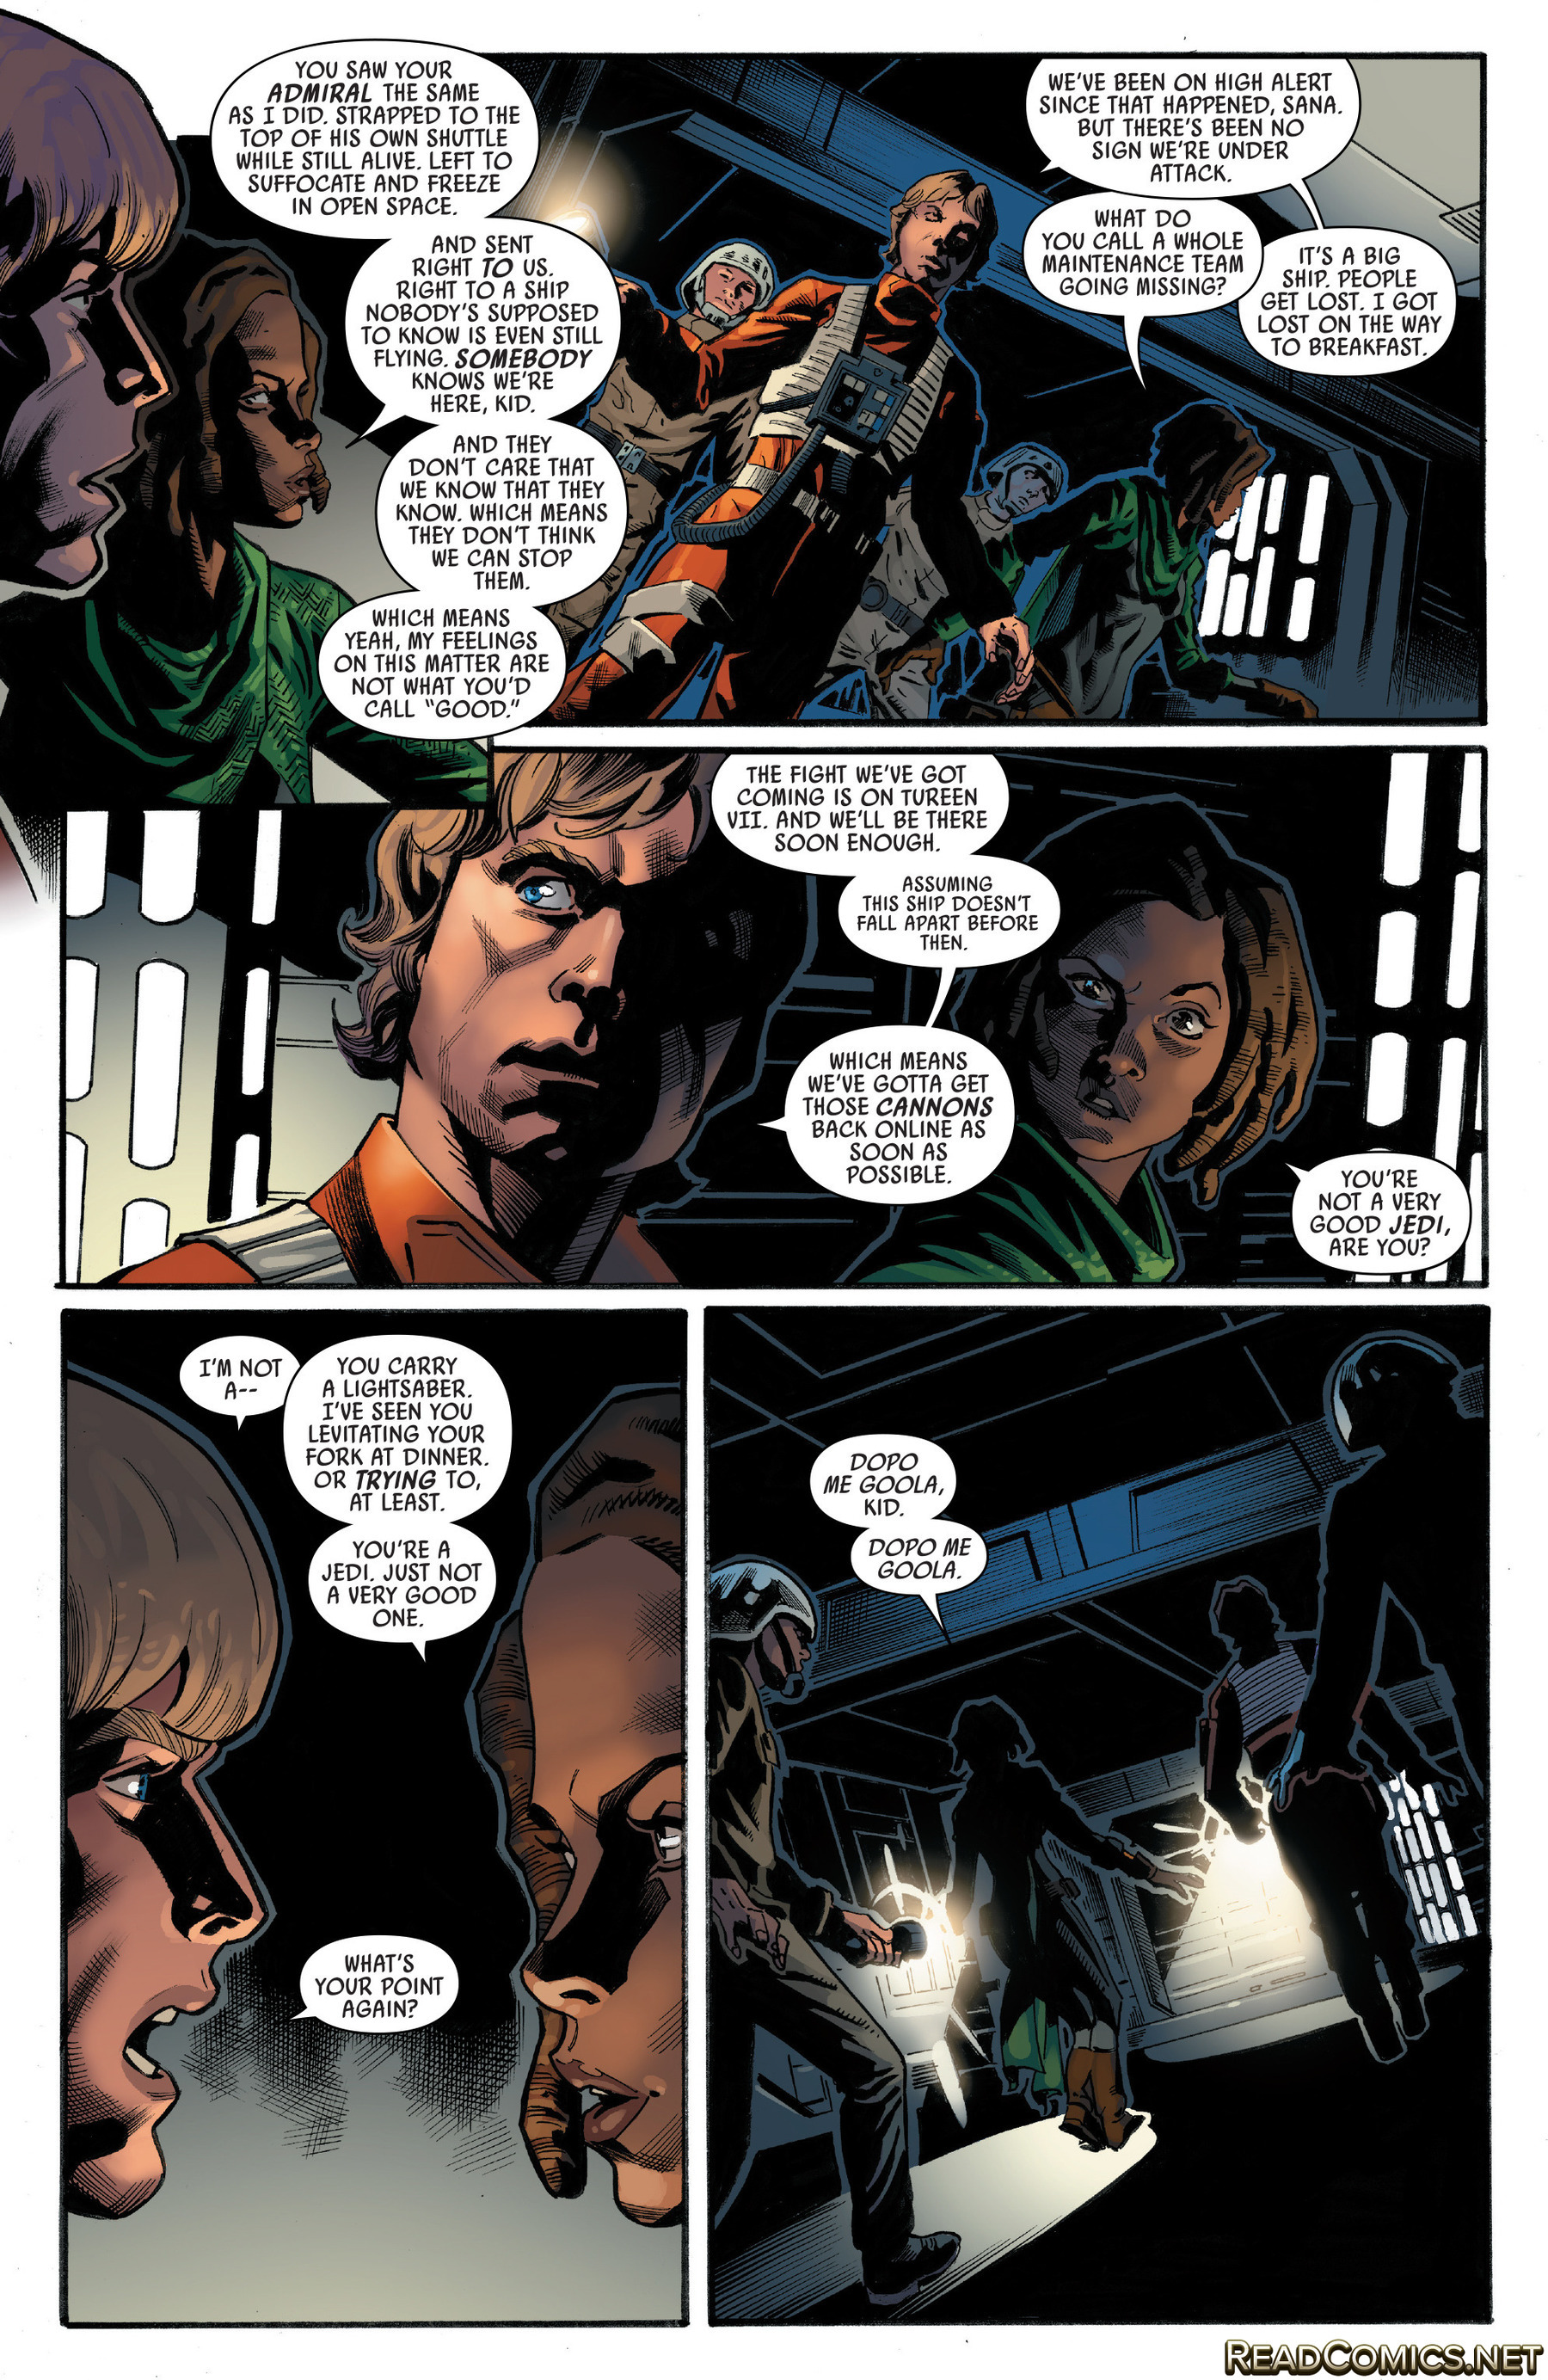 Star Wars (2015-): Chapter 24 - Page 4